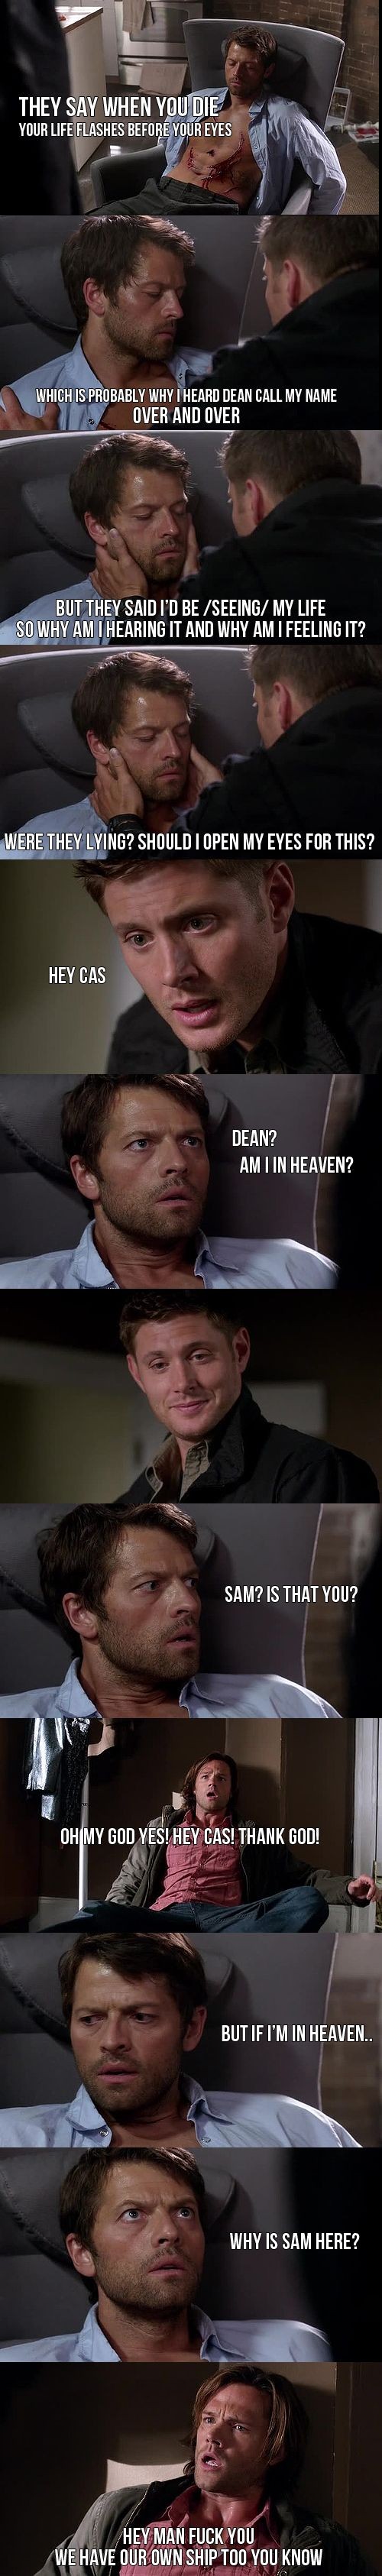 "But if I'm in Heaven... why is Sam here?" ||| Sup...